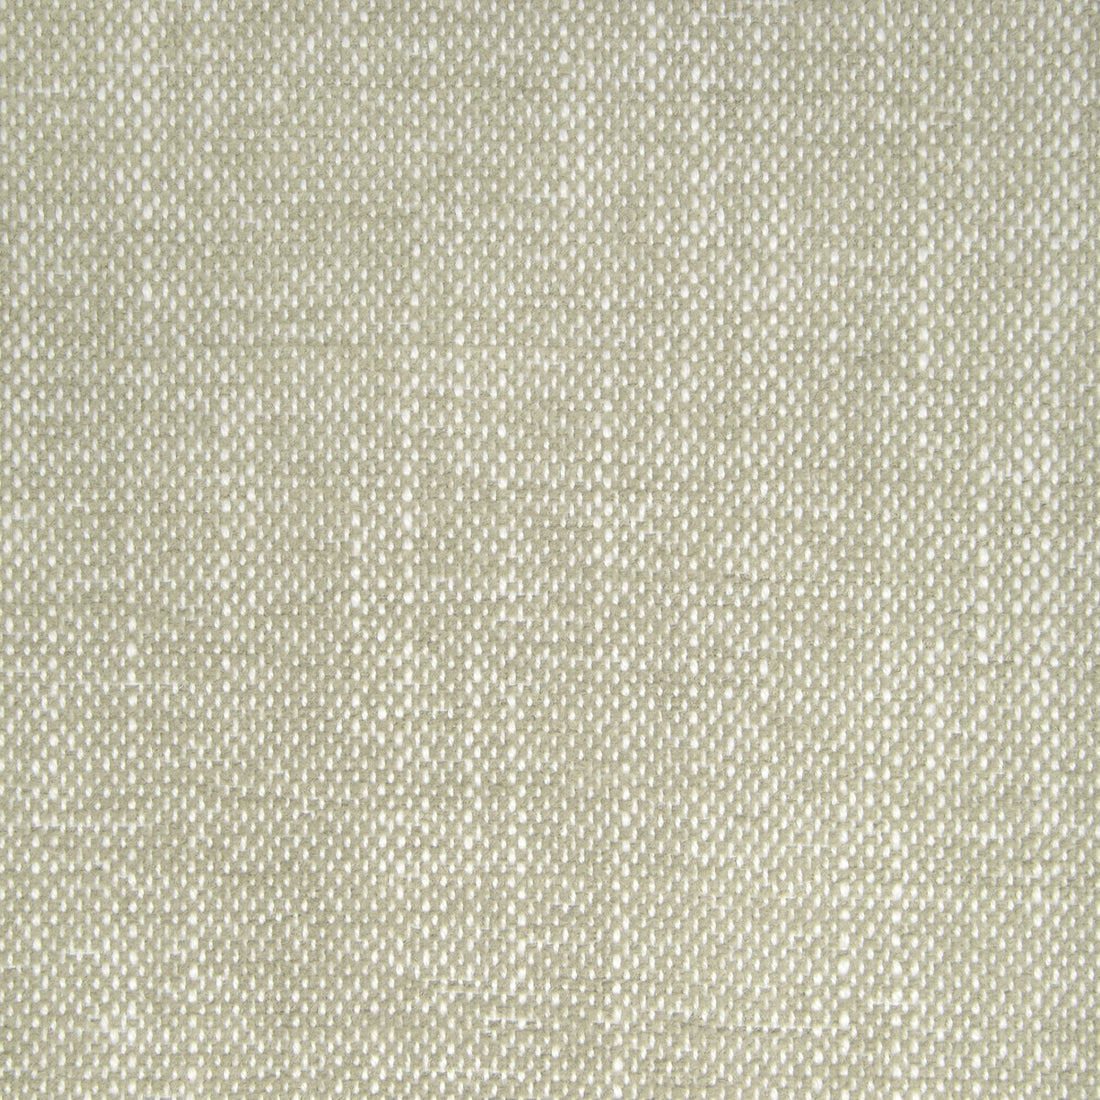 Kravet Smart-36885 fabric in 106 color - pattern 36885.106.0 - by Kravet Smart in the Inside Out Performance Fabrics collection